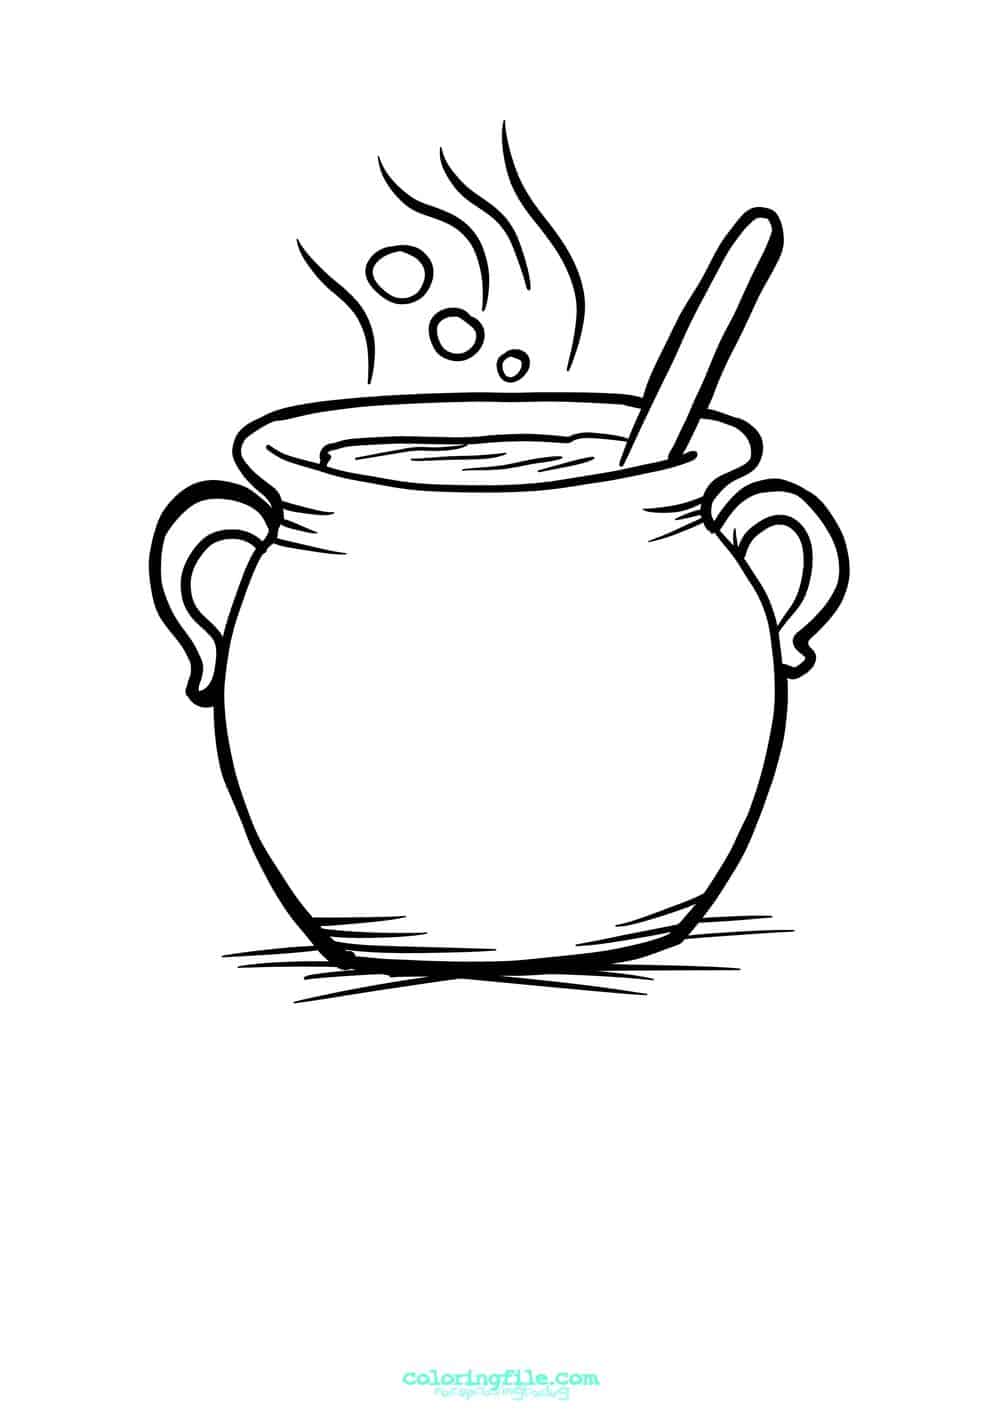 Cauldron halloween coloring pages